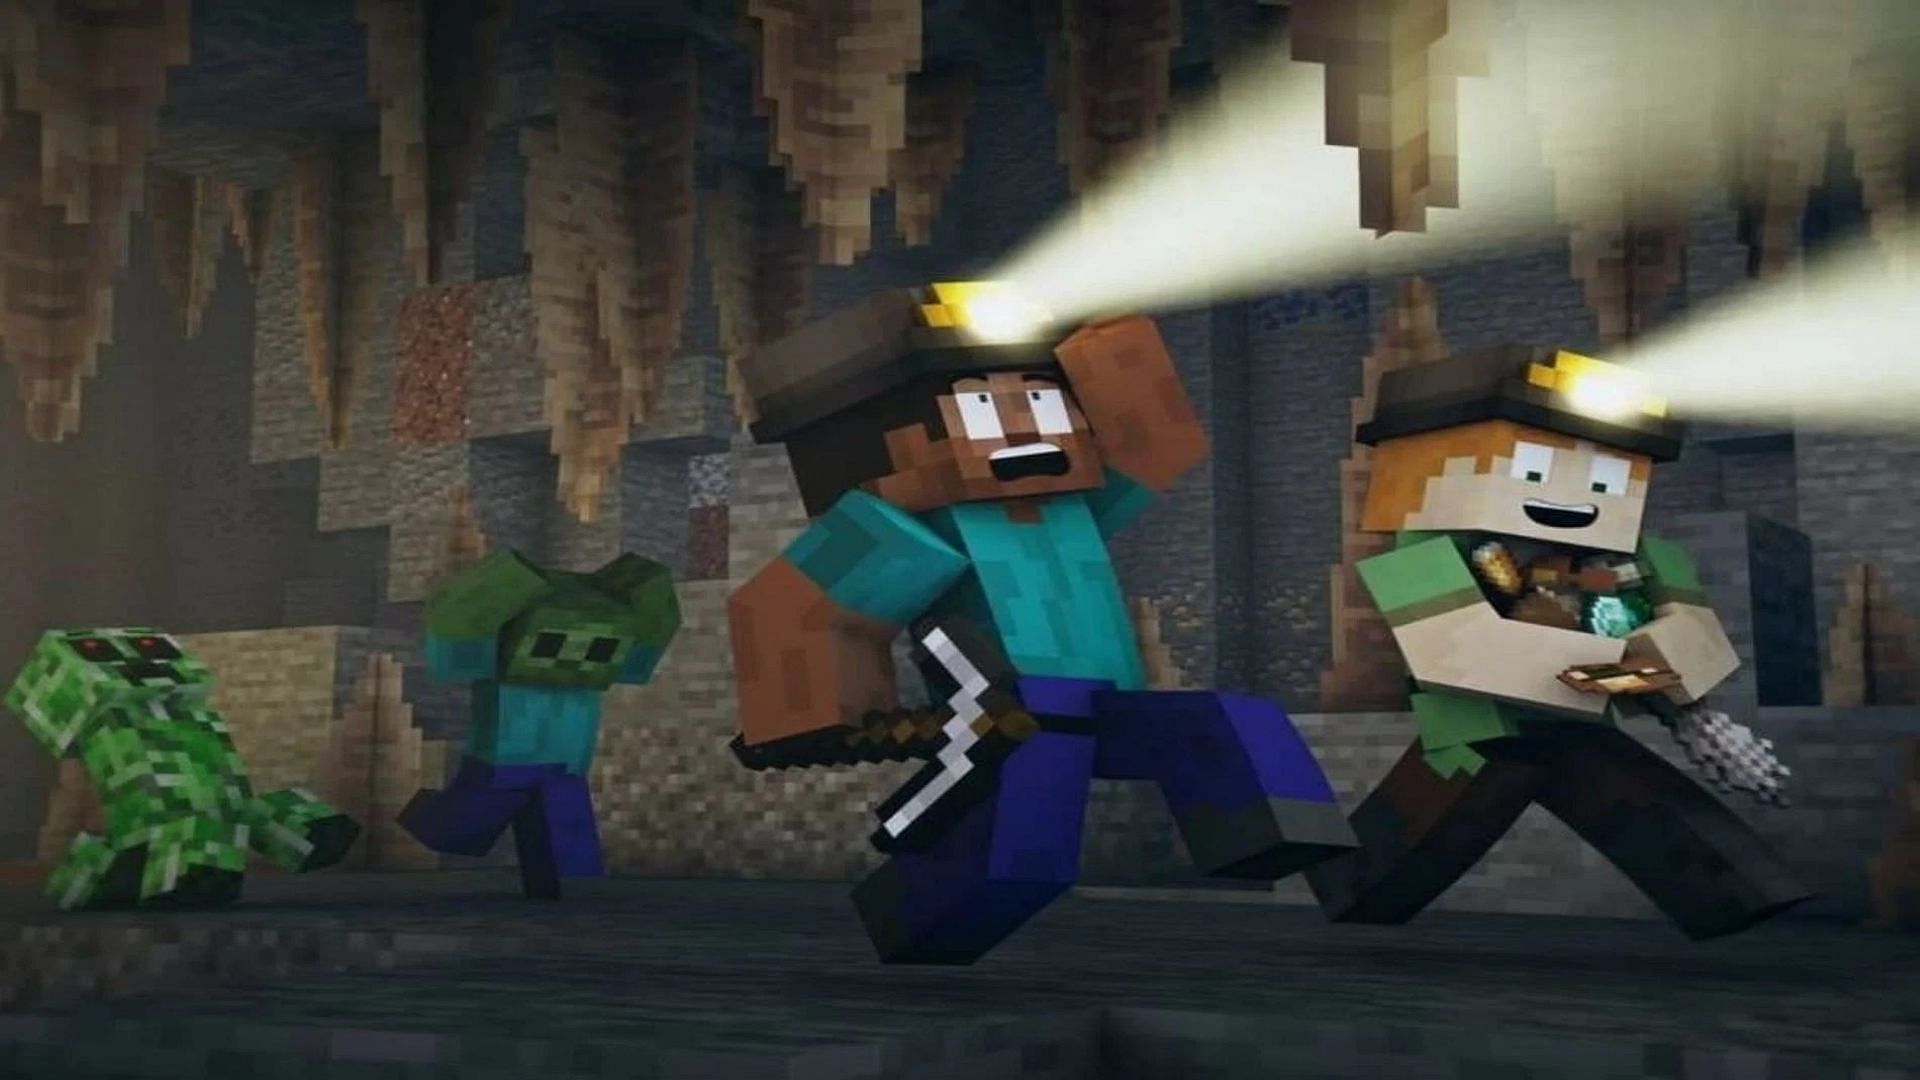 Steve and Alex run into some trouble in a dripstone cave in the game (Image via Mojang)